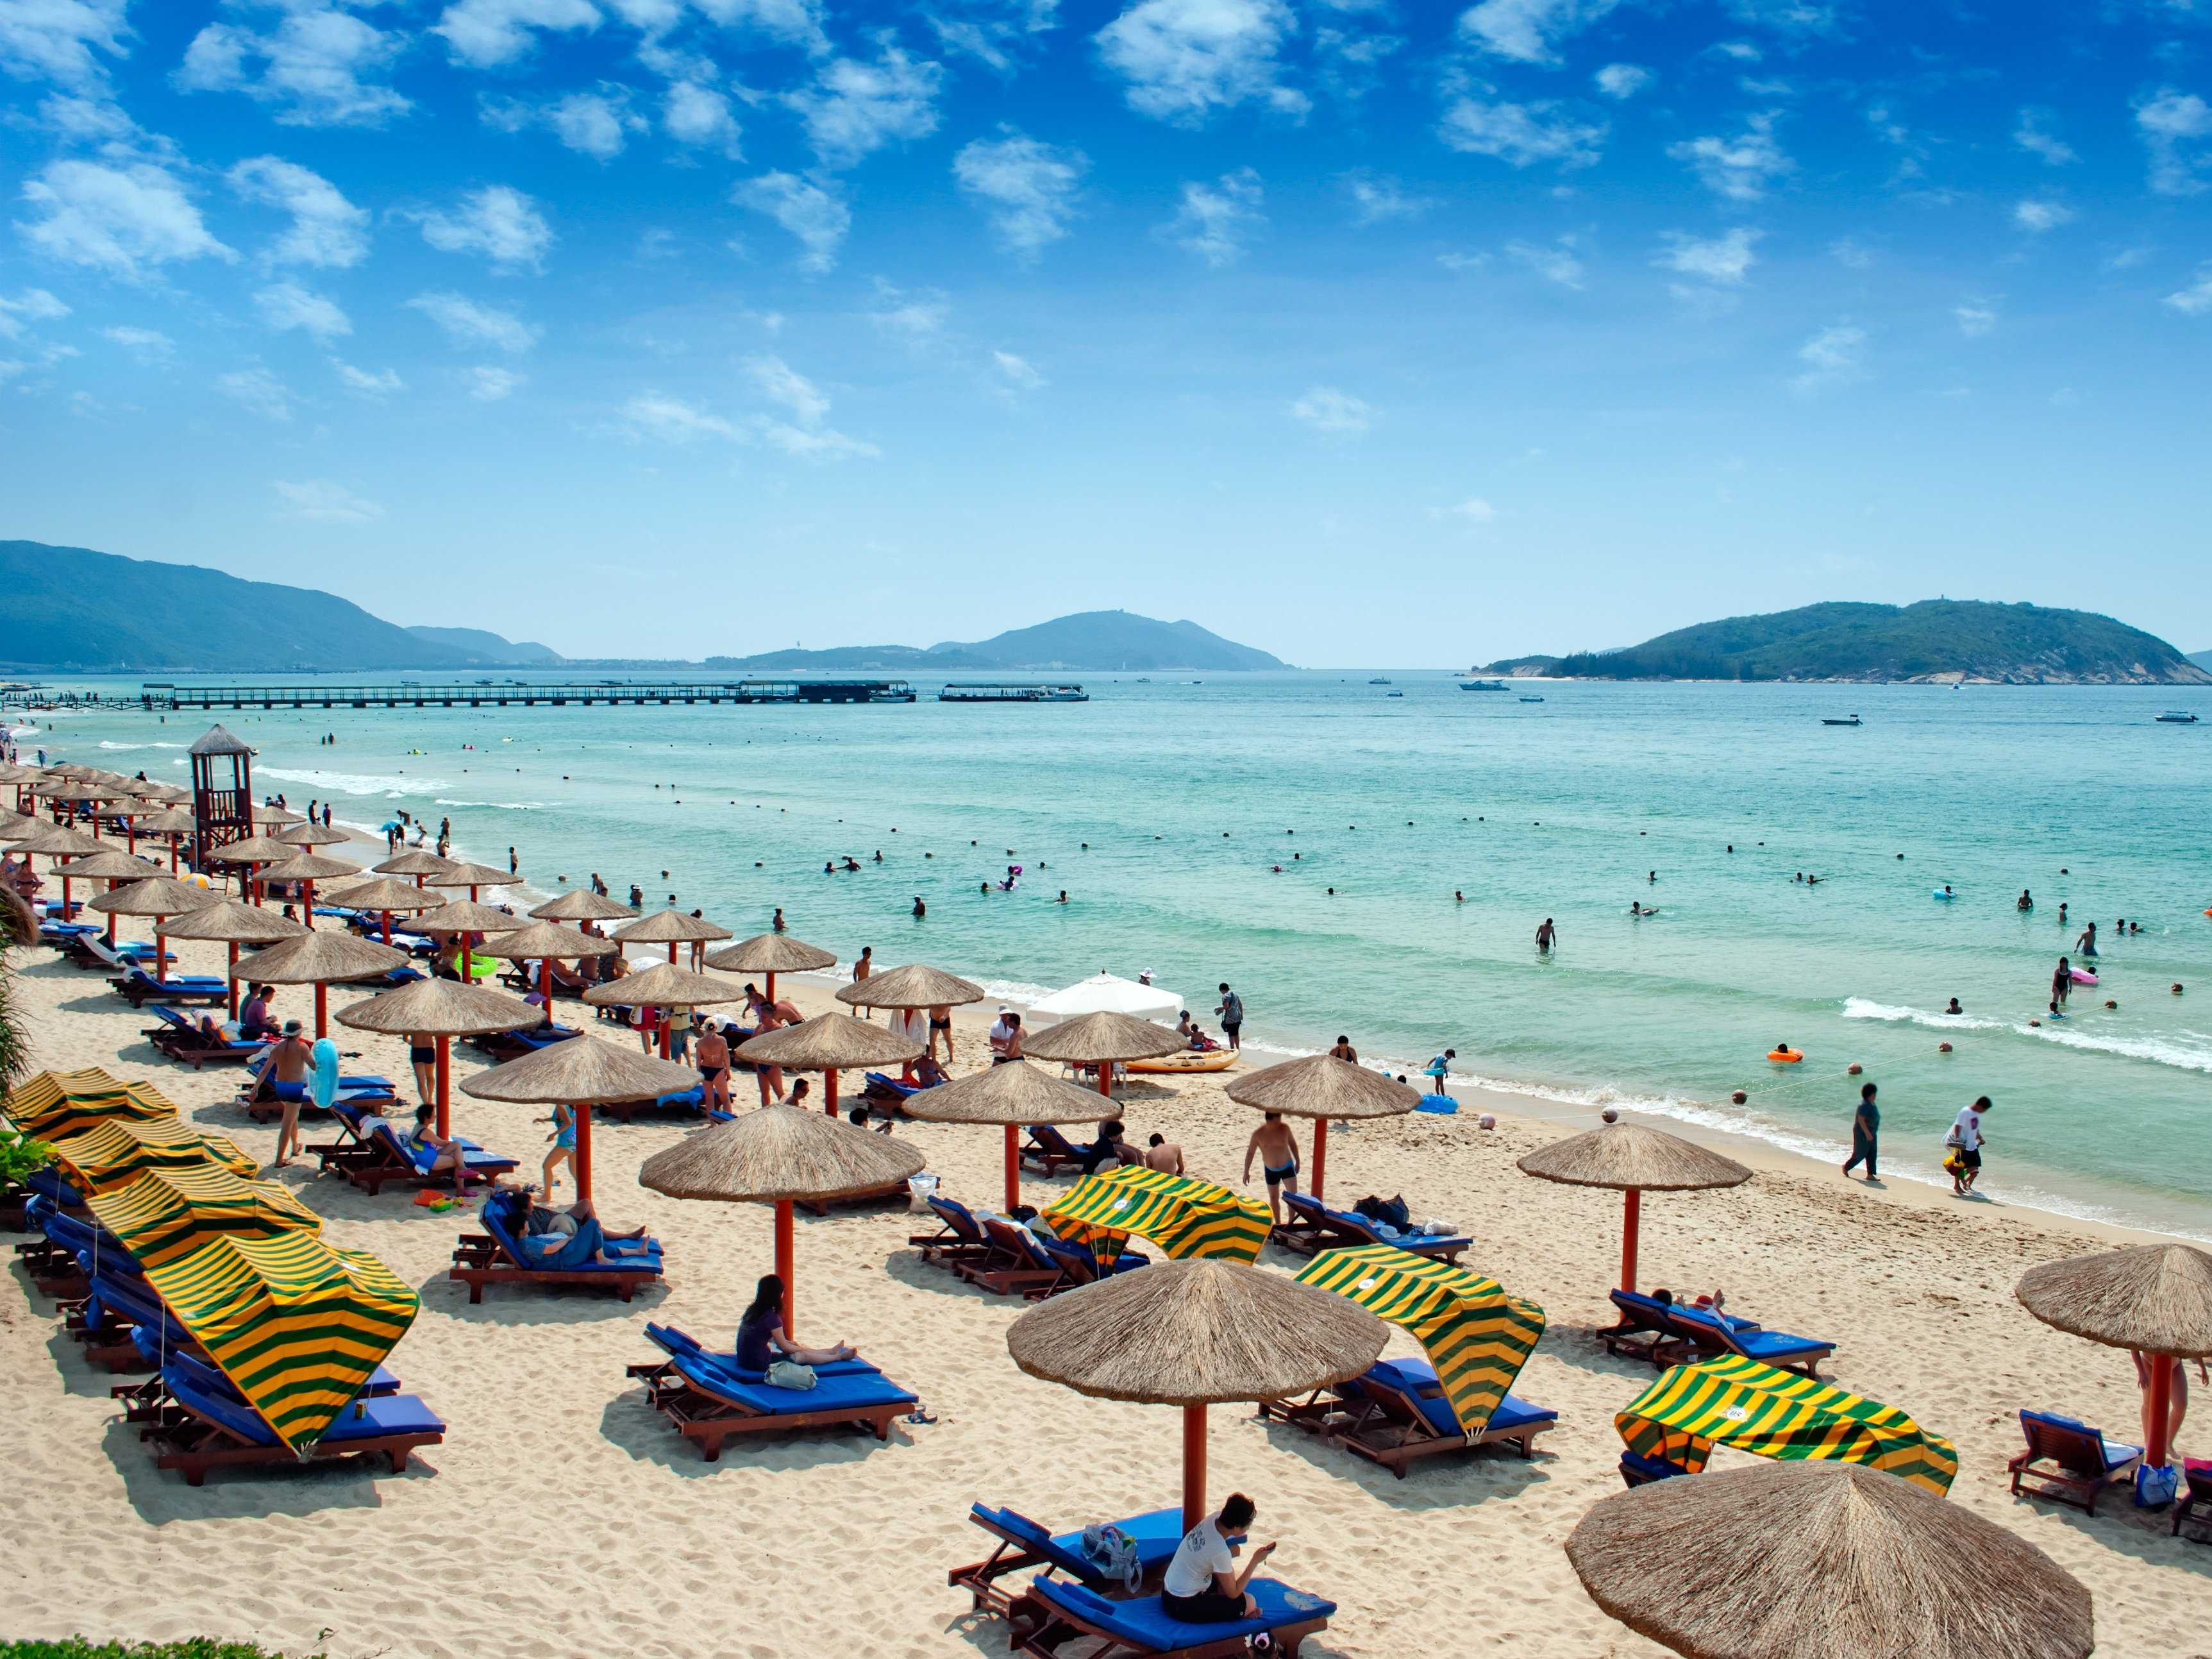 http://www.businessinsider.in/photo/46180592/38-places-you-need-to-visit-in-china/Sunbathe-on-the-beaches-of-Hainan-.jpg